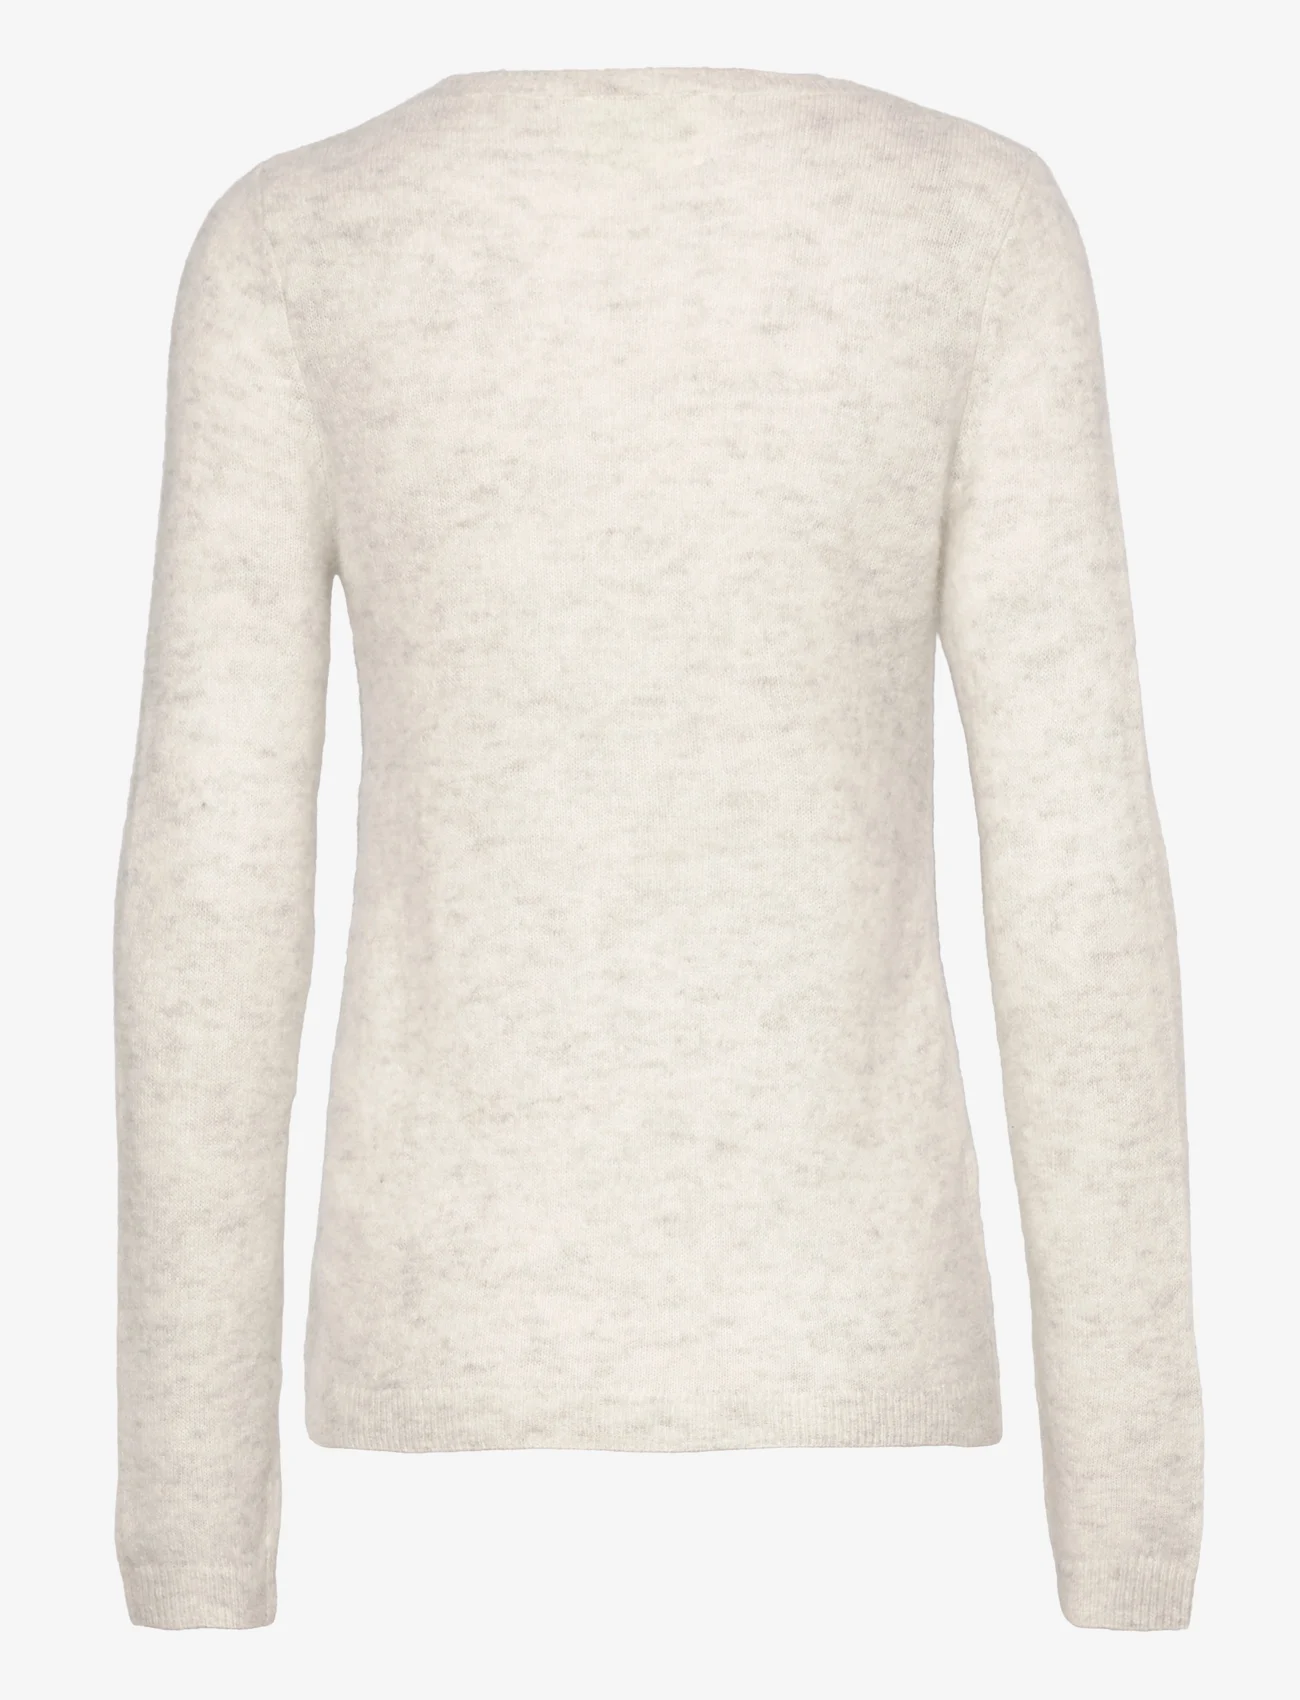 Sofie Schnoor - Knit - jumpers - off white - 1